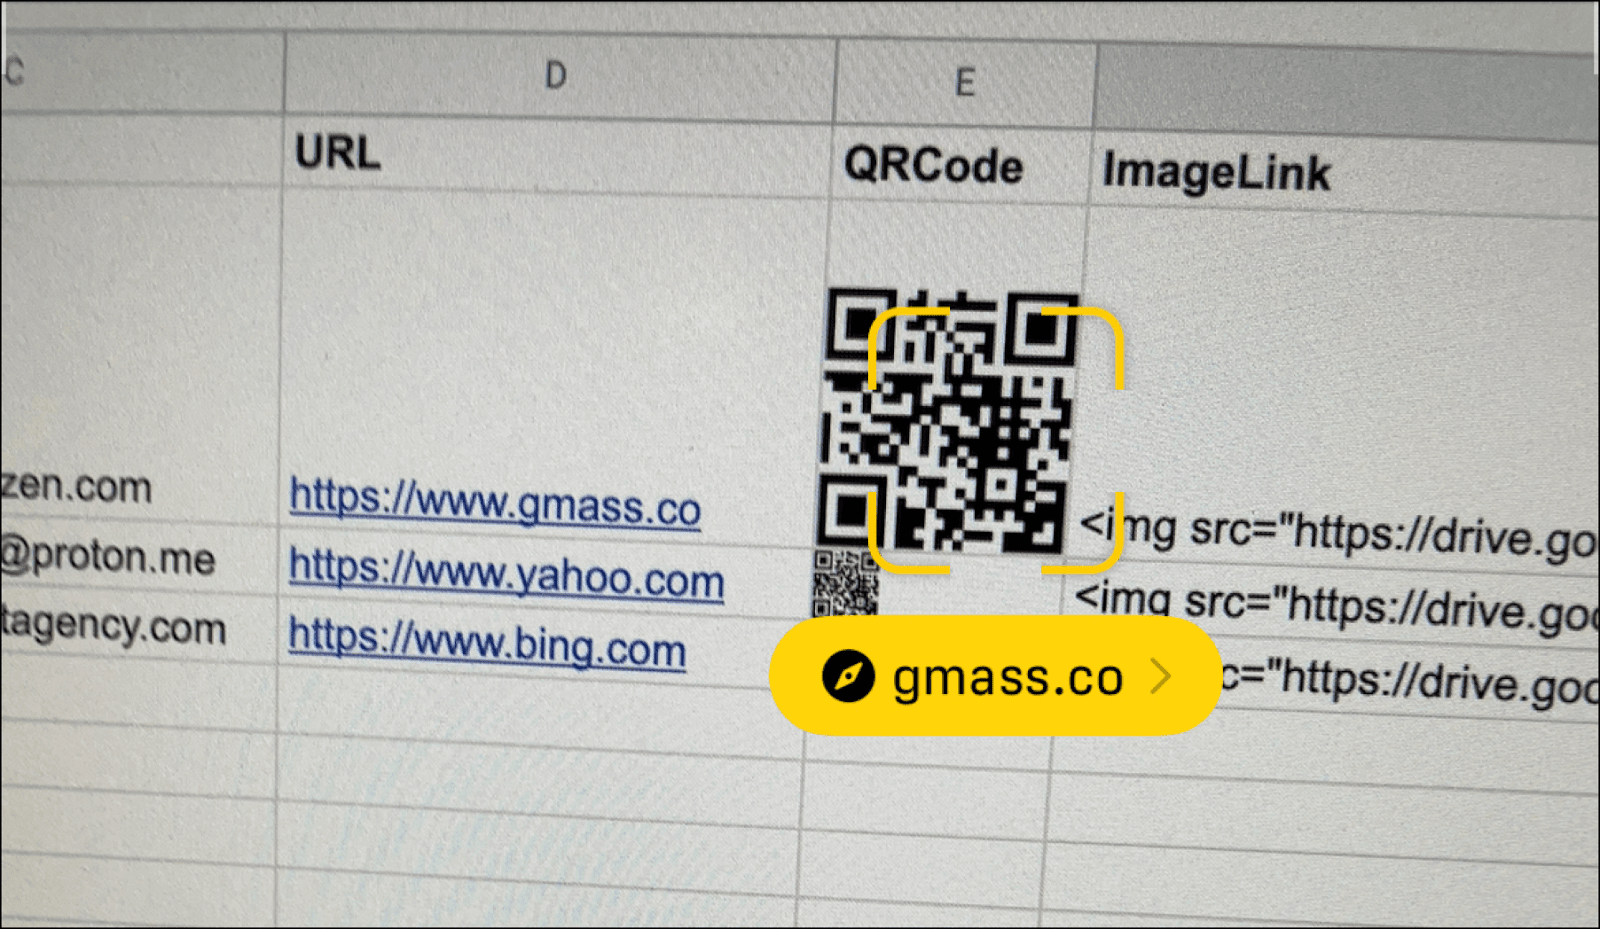 Test out a QR code in your sheet.